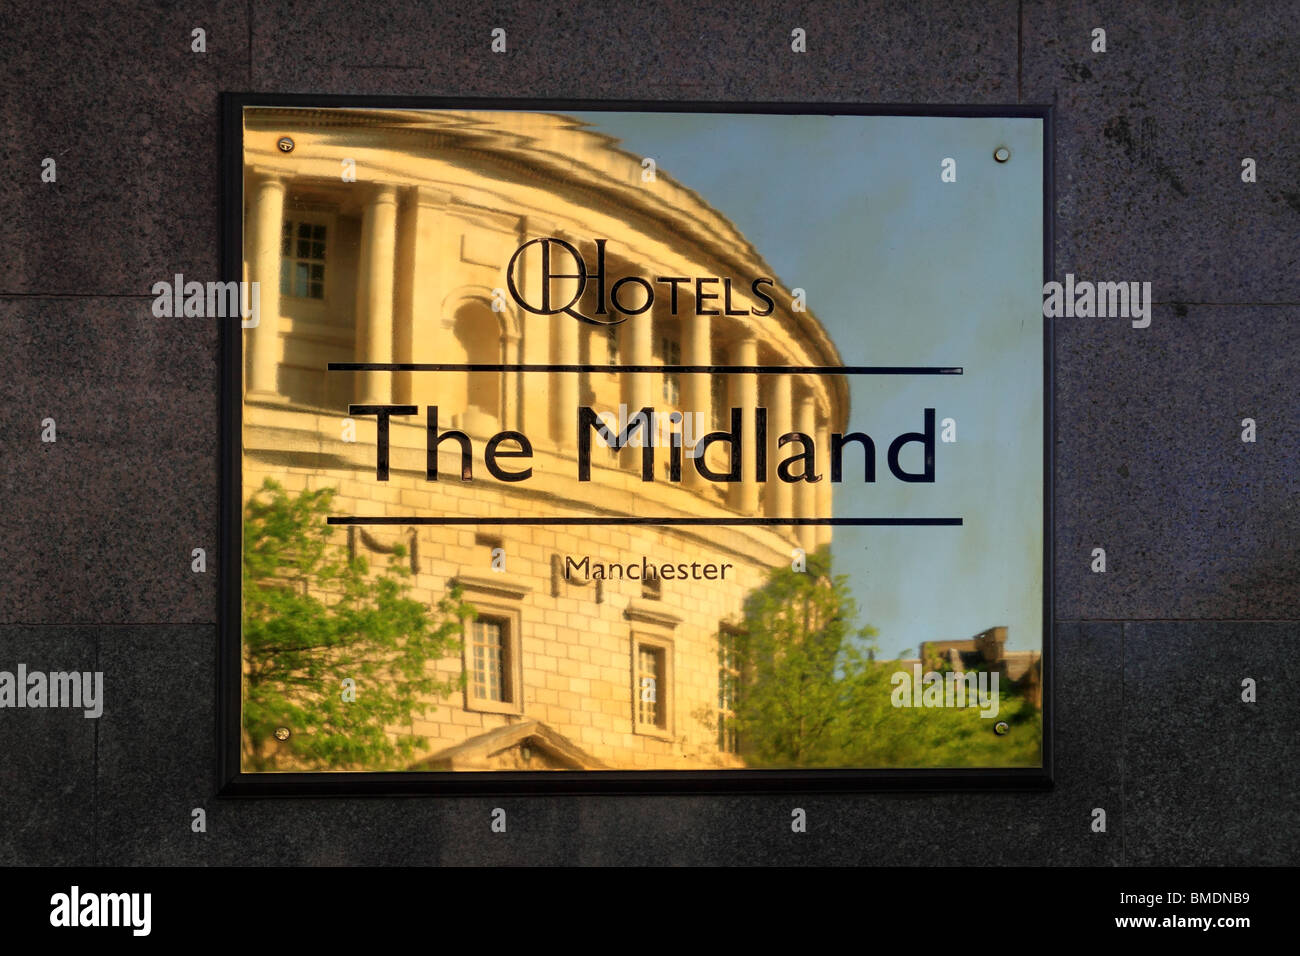 The Central Library reflected in the sign at the Midland Hotel, Manchester Stock Photo